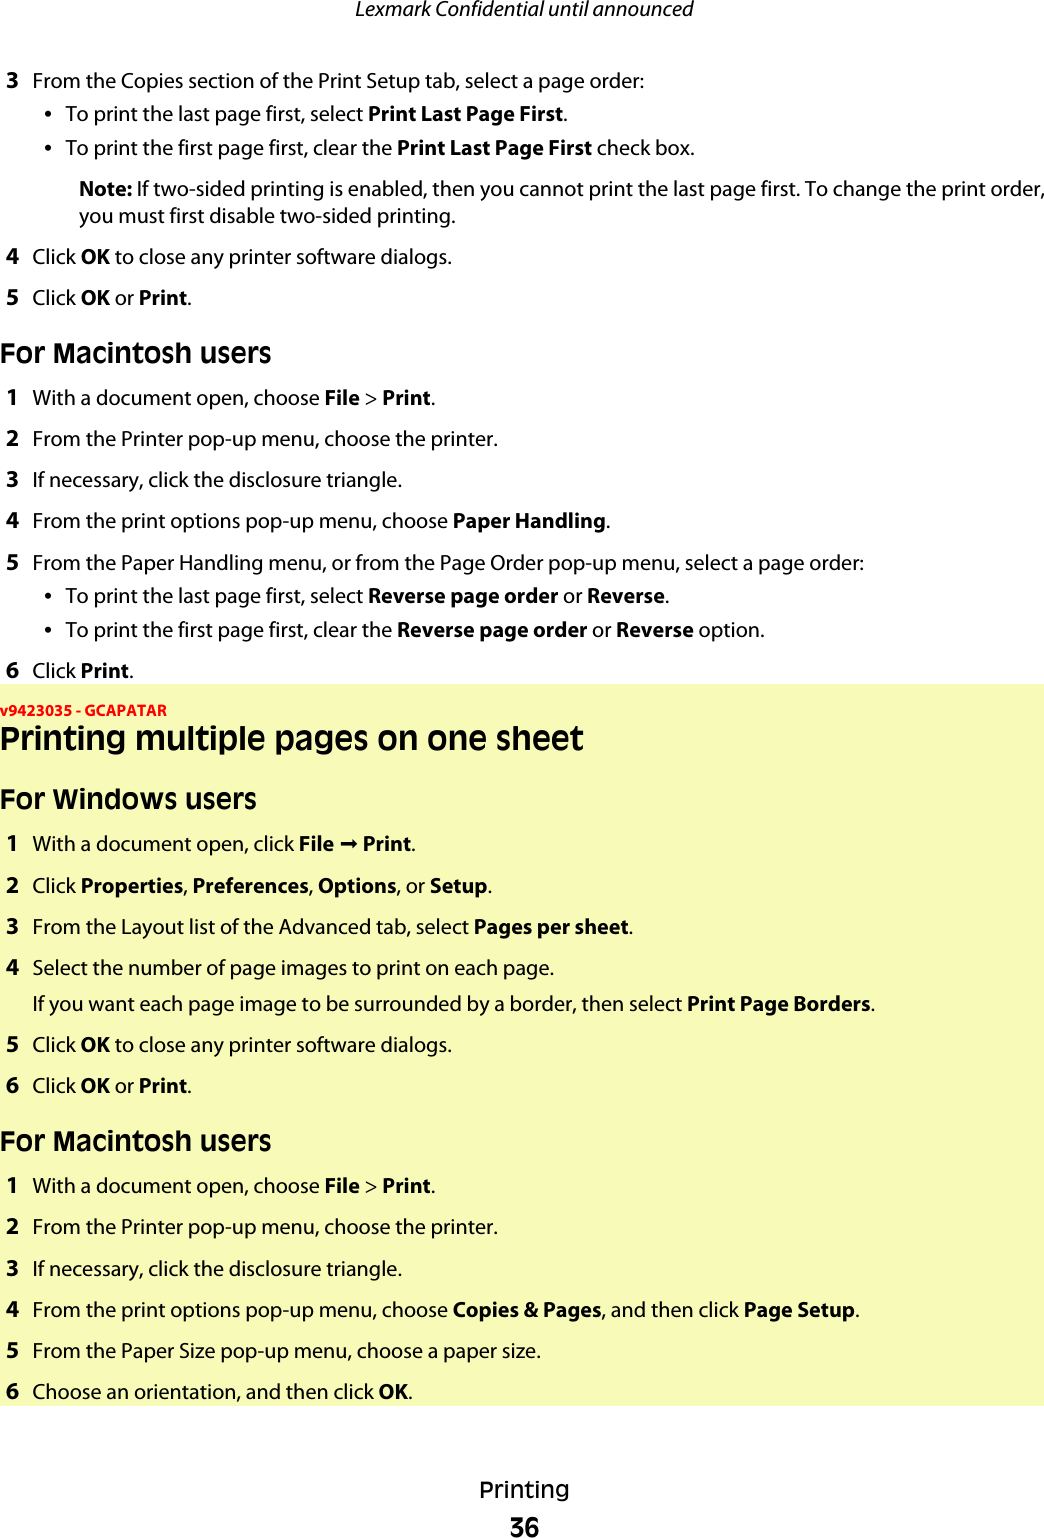 3From the Copies section of the Print Setup tab, select a page order:•To print the last page first, select Print Last Page First.•To print the first page first, clear the Print Last Page First check box.Note: If two-sided printing is enabled, then you cannot print the last page first. To change the print order,you must first disable two-sided printing.4Click OK to close any printer software dialogs.5Click OK or Print.For Macintosh users1With a document open, choose File &gt; Print.2From the Printer pop-up menu, choose the printer.3If necessary, click the disclosure triangle.4From the print options pop-up menu, choose Paper Handling.5From the Paper Handling menu, or from the Page Order pop-up menu, select a page order:•To print the last page first, select Reverse page order or Reverse.•To print the first page first, clear the Reverse page order or Reverse option.6Click Print.v9423035 - GCAPATARPrinting multiple pages on one sheetFor Windows users1With a document open, click File ª Print.2Click Properties, Preferences, Options, or Setup.3From the Layout list of the Advanced tab, select Pages per sheet.4Select the number of page images to print on each page.If you want each page image to be surrounded by a border, then select Print Page Borders.5Click OK to close any printer software dialogs.6Click OK or Print.For Macintosh users1With a document open, choose File &gt; Print.2From the Printer pop-up menu, choose the printer.3If necessary, click the disclosure triangle.4From the print options pop-up menu, choose Copies &amp; Pages, and then click Page Setup.5From the Paper Size pop-up menu, choose a paper size.6Choose an orientation, and then click OK.Lexmark Confidential until announcedPrinting36